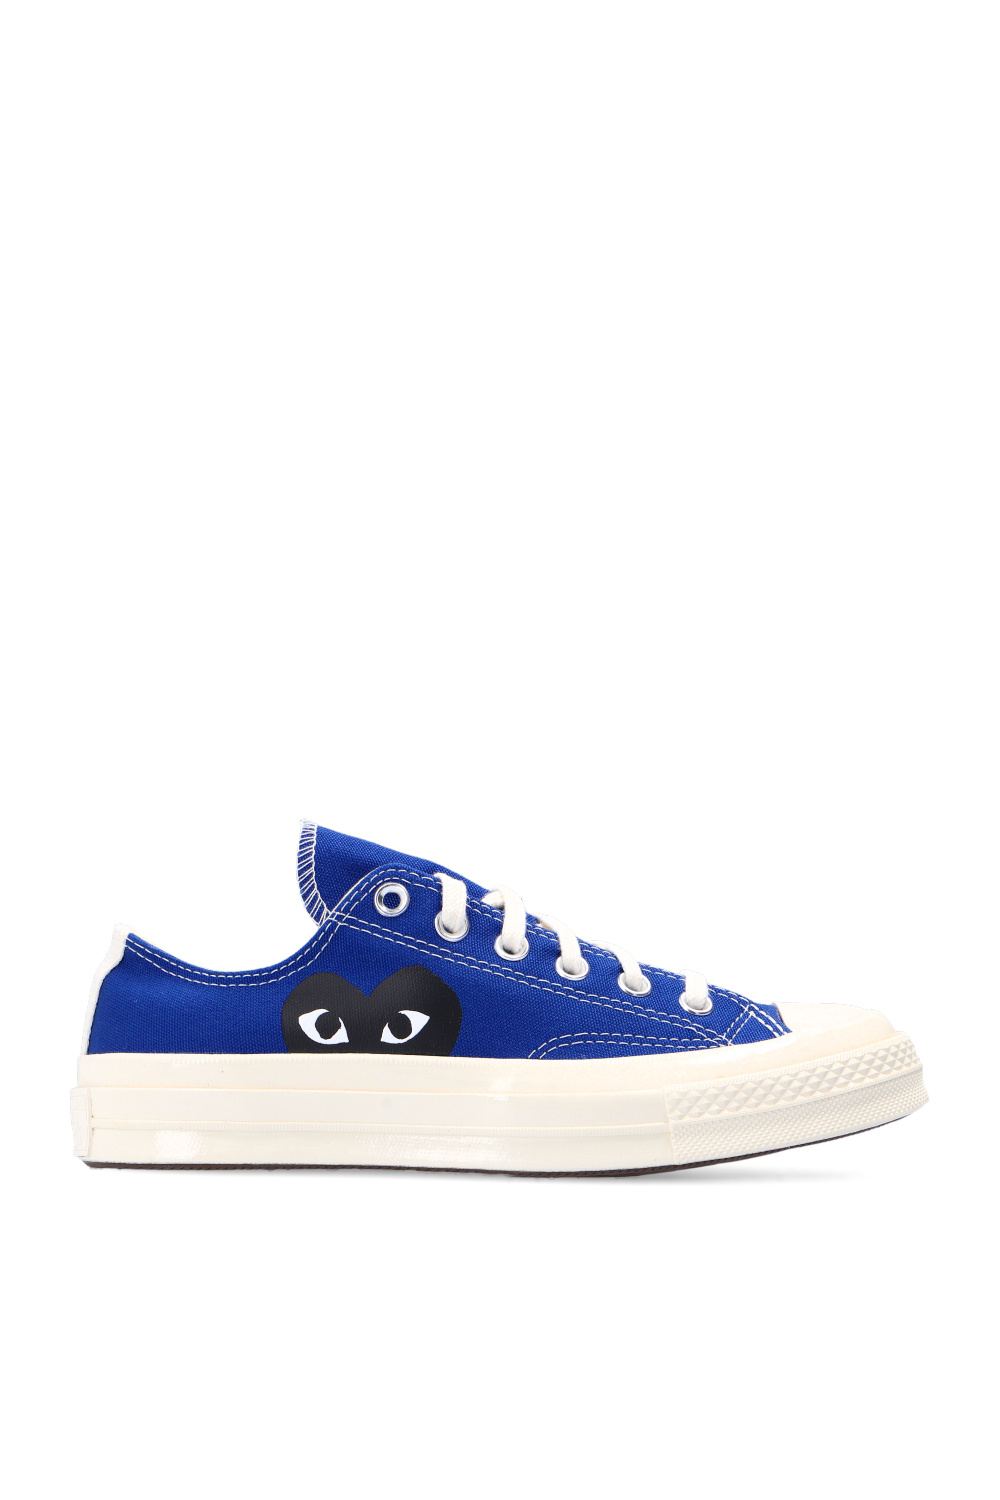 Women's Shoes | Star 70s Ox Lightning Storm x Converse breakpoint | Converse  breakpoint Pro Leather Low Space Jam A New Legacy Lola - IetpShops - Comme  des Garçons Play Pigalle x